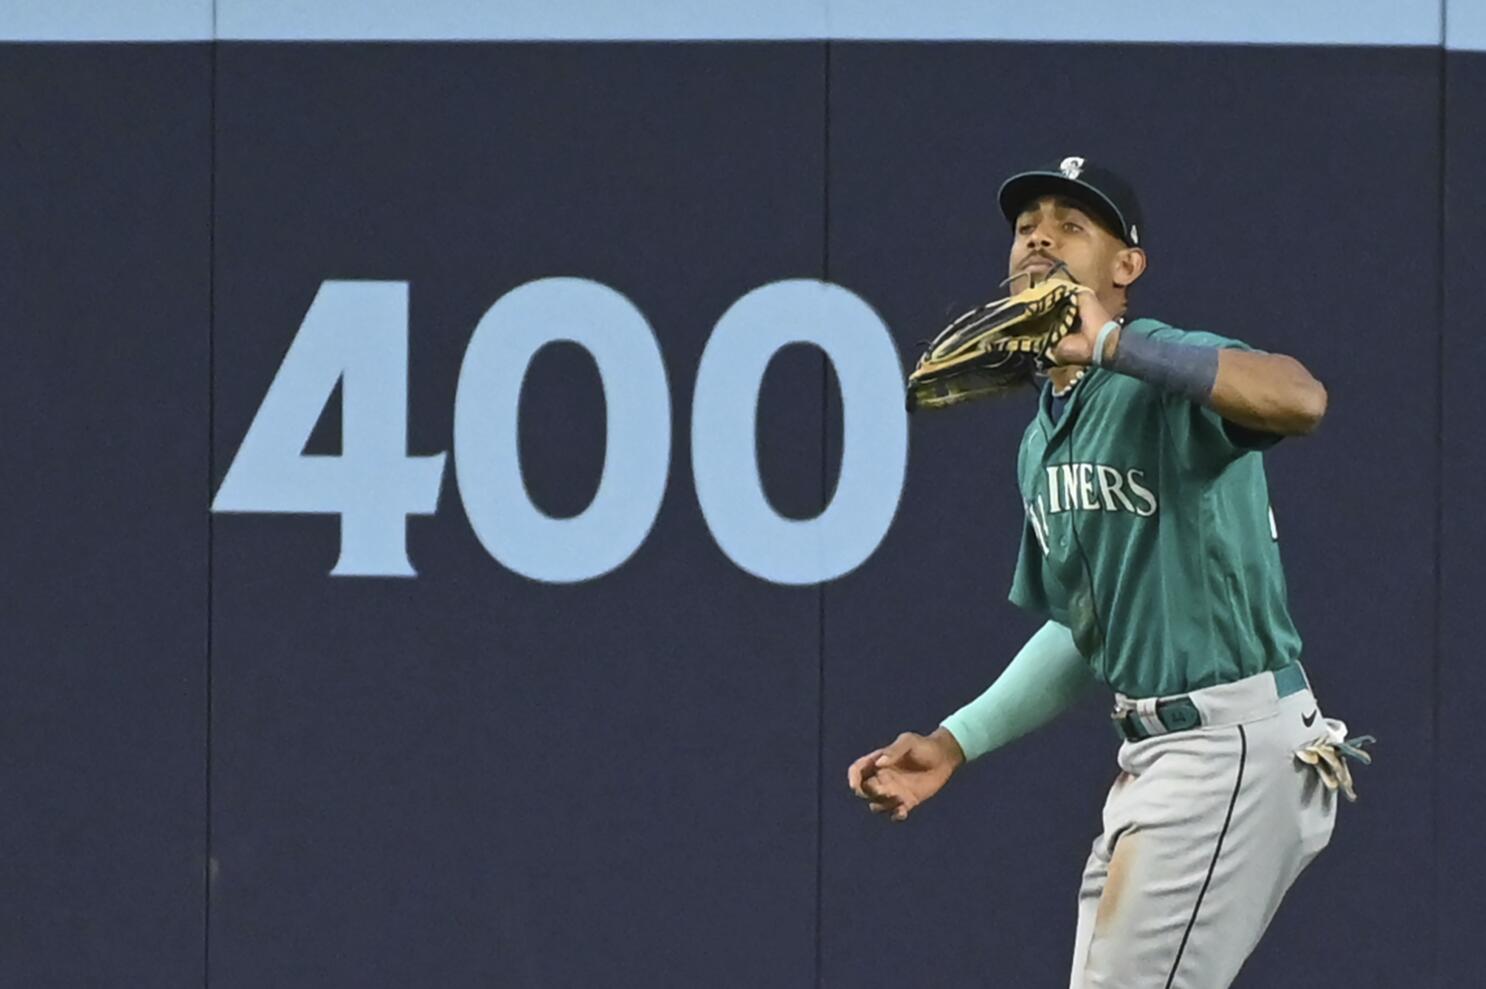 Mariners' Julio Rodríguez exits game with sore lower back - NBC Sports